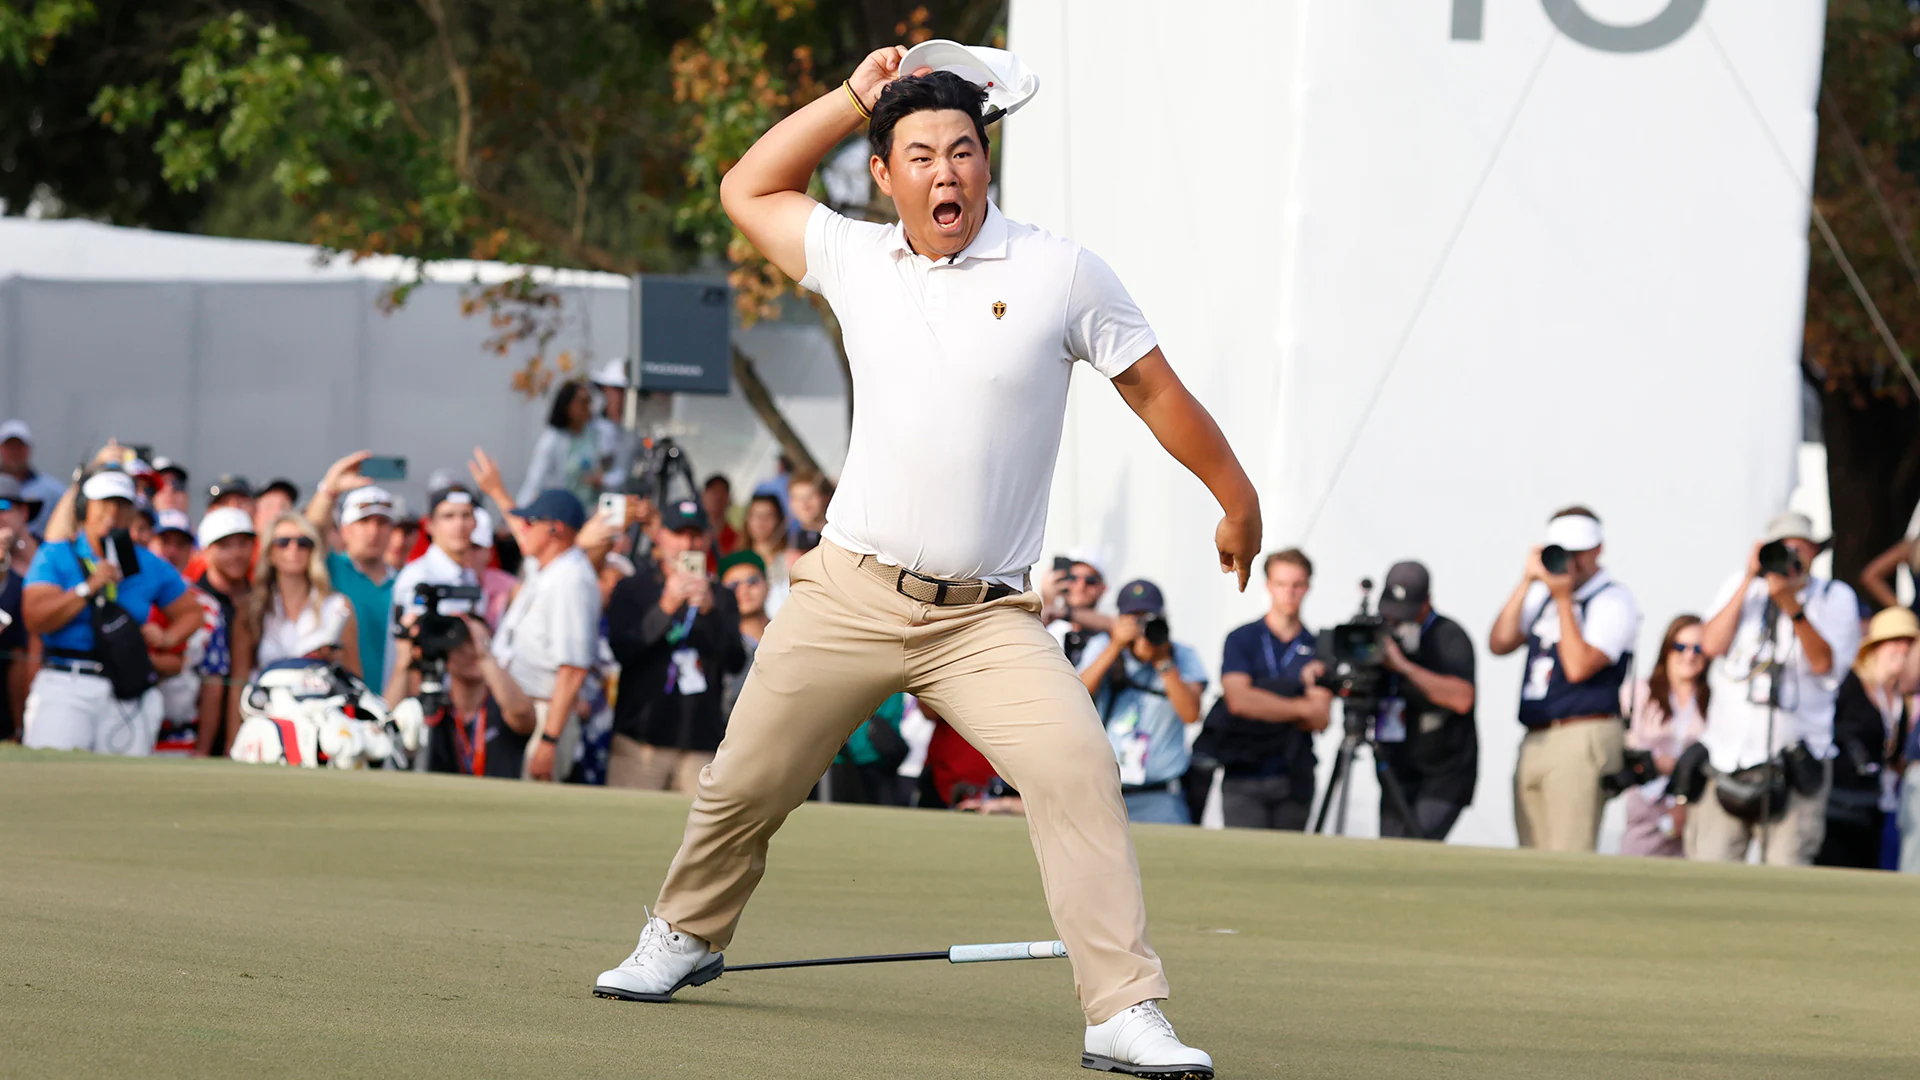 Tom Kim ‘motivated’ by Presidents Cup heroics while also being ‘angered’ by shortcomings